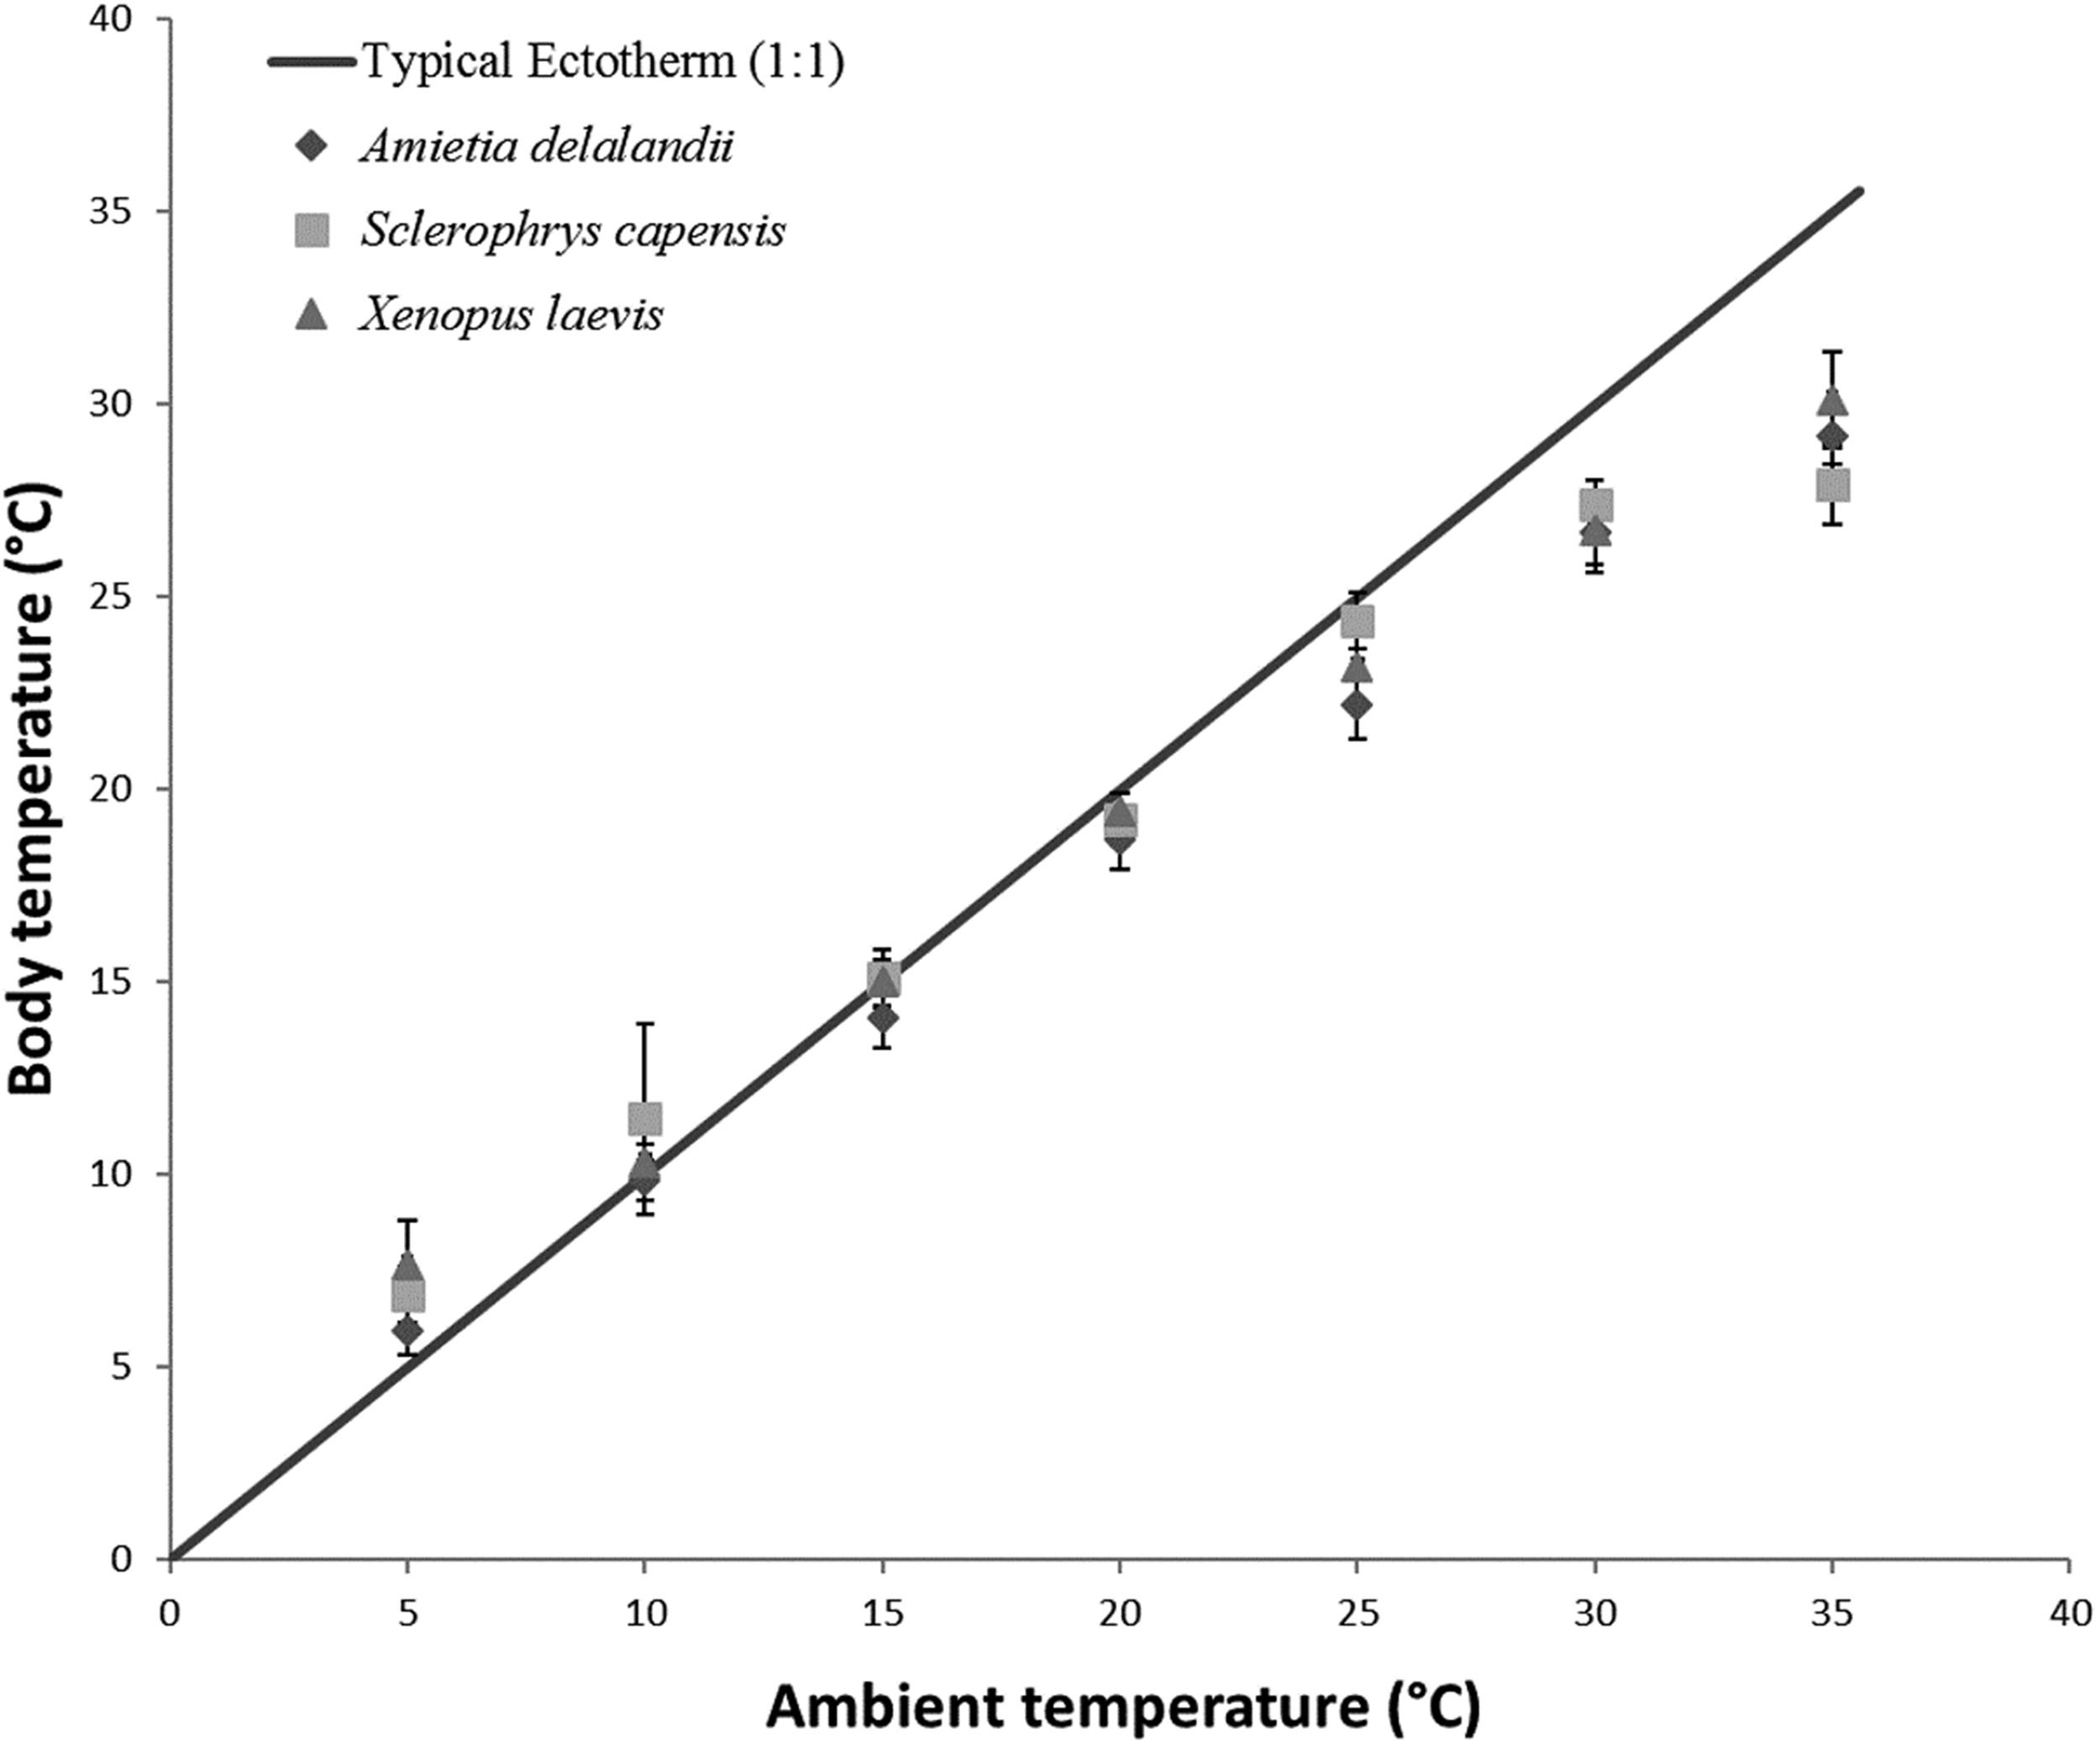 The Role Of Ambient Temperature In Influencing Baby Turtles’ Metabolic Rate